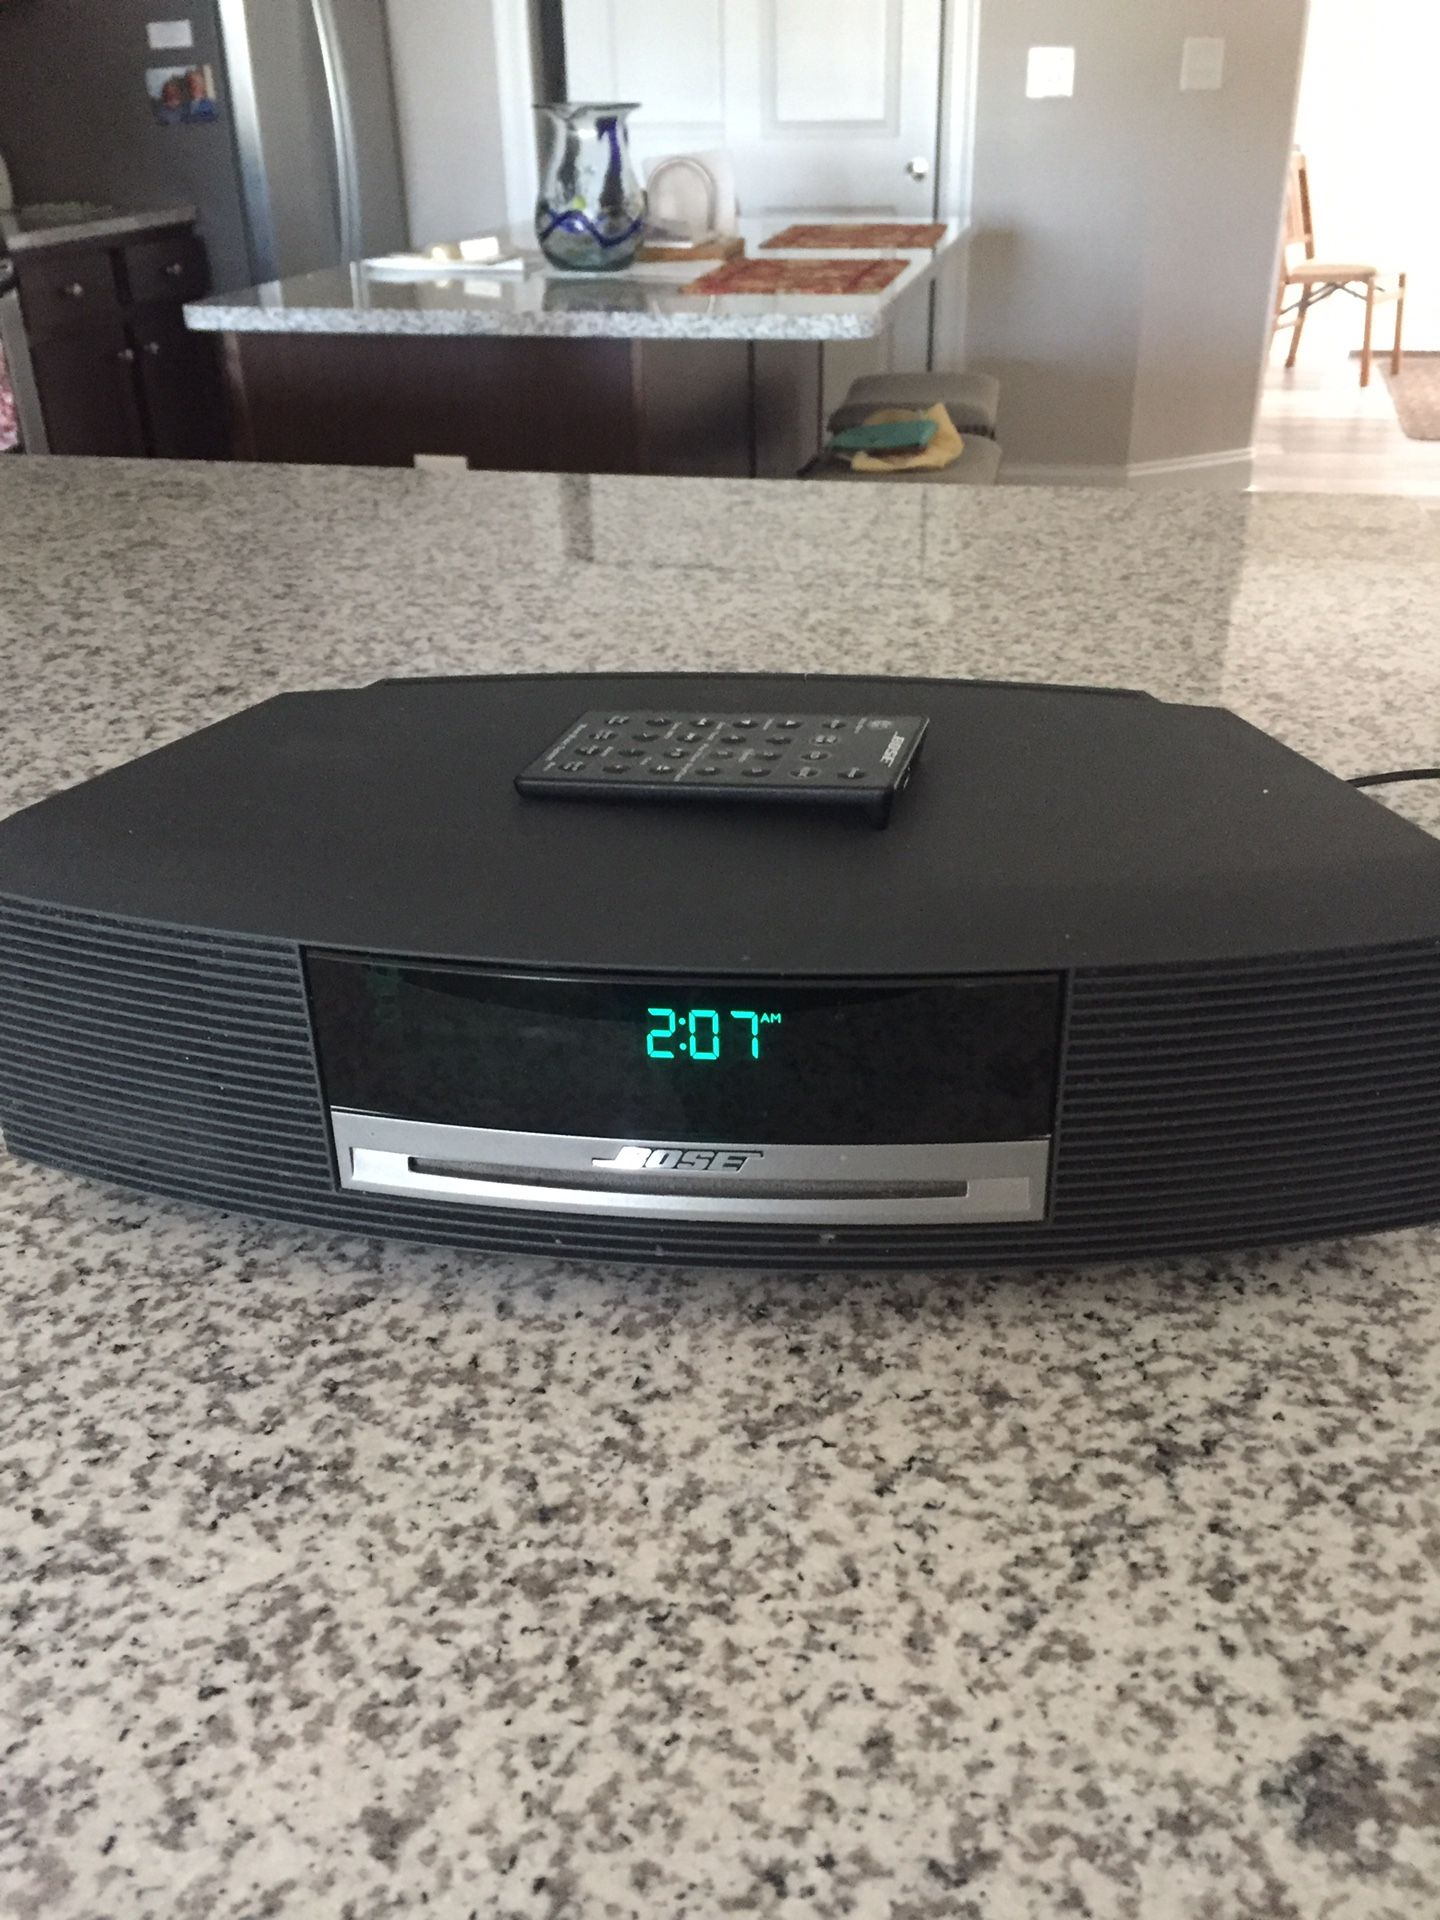 Bose AM/FM with CD player